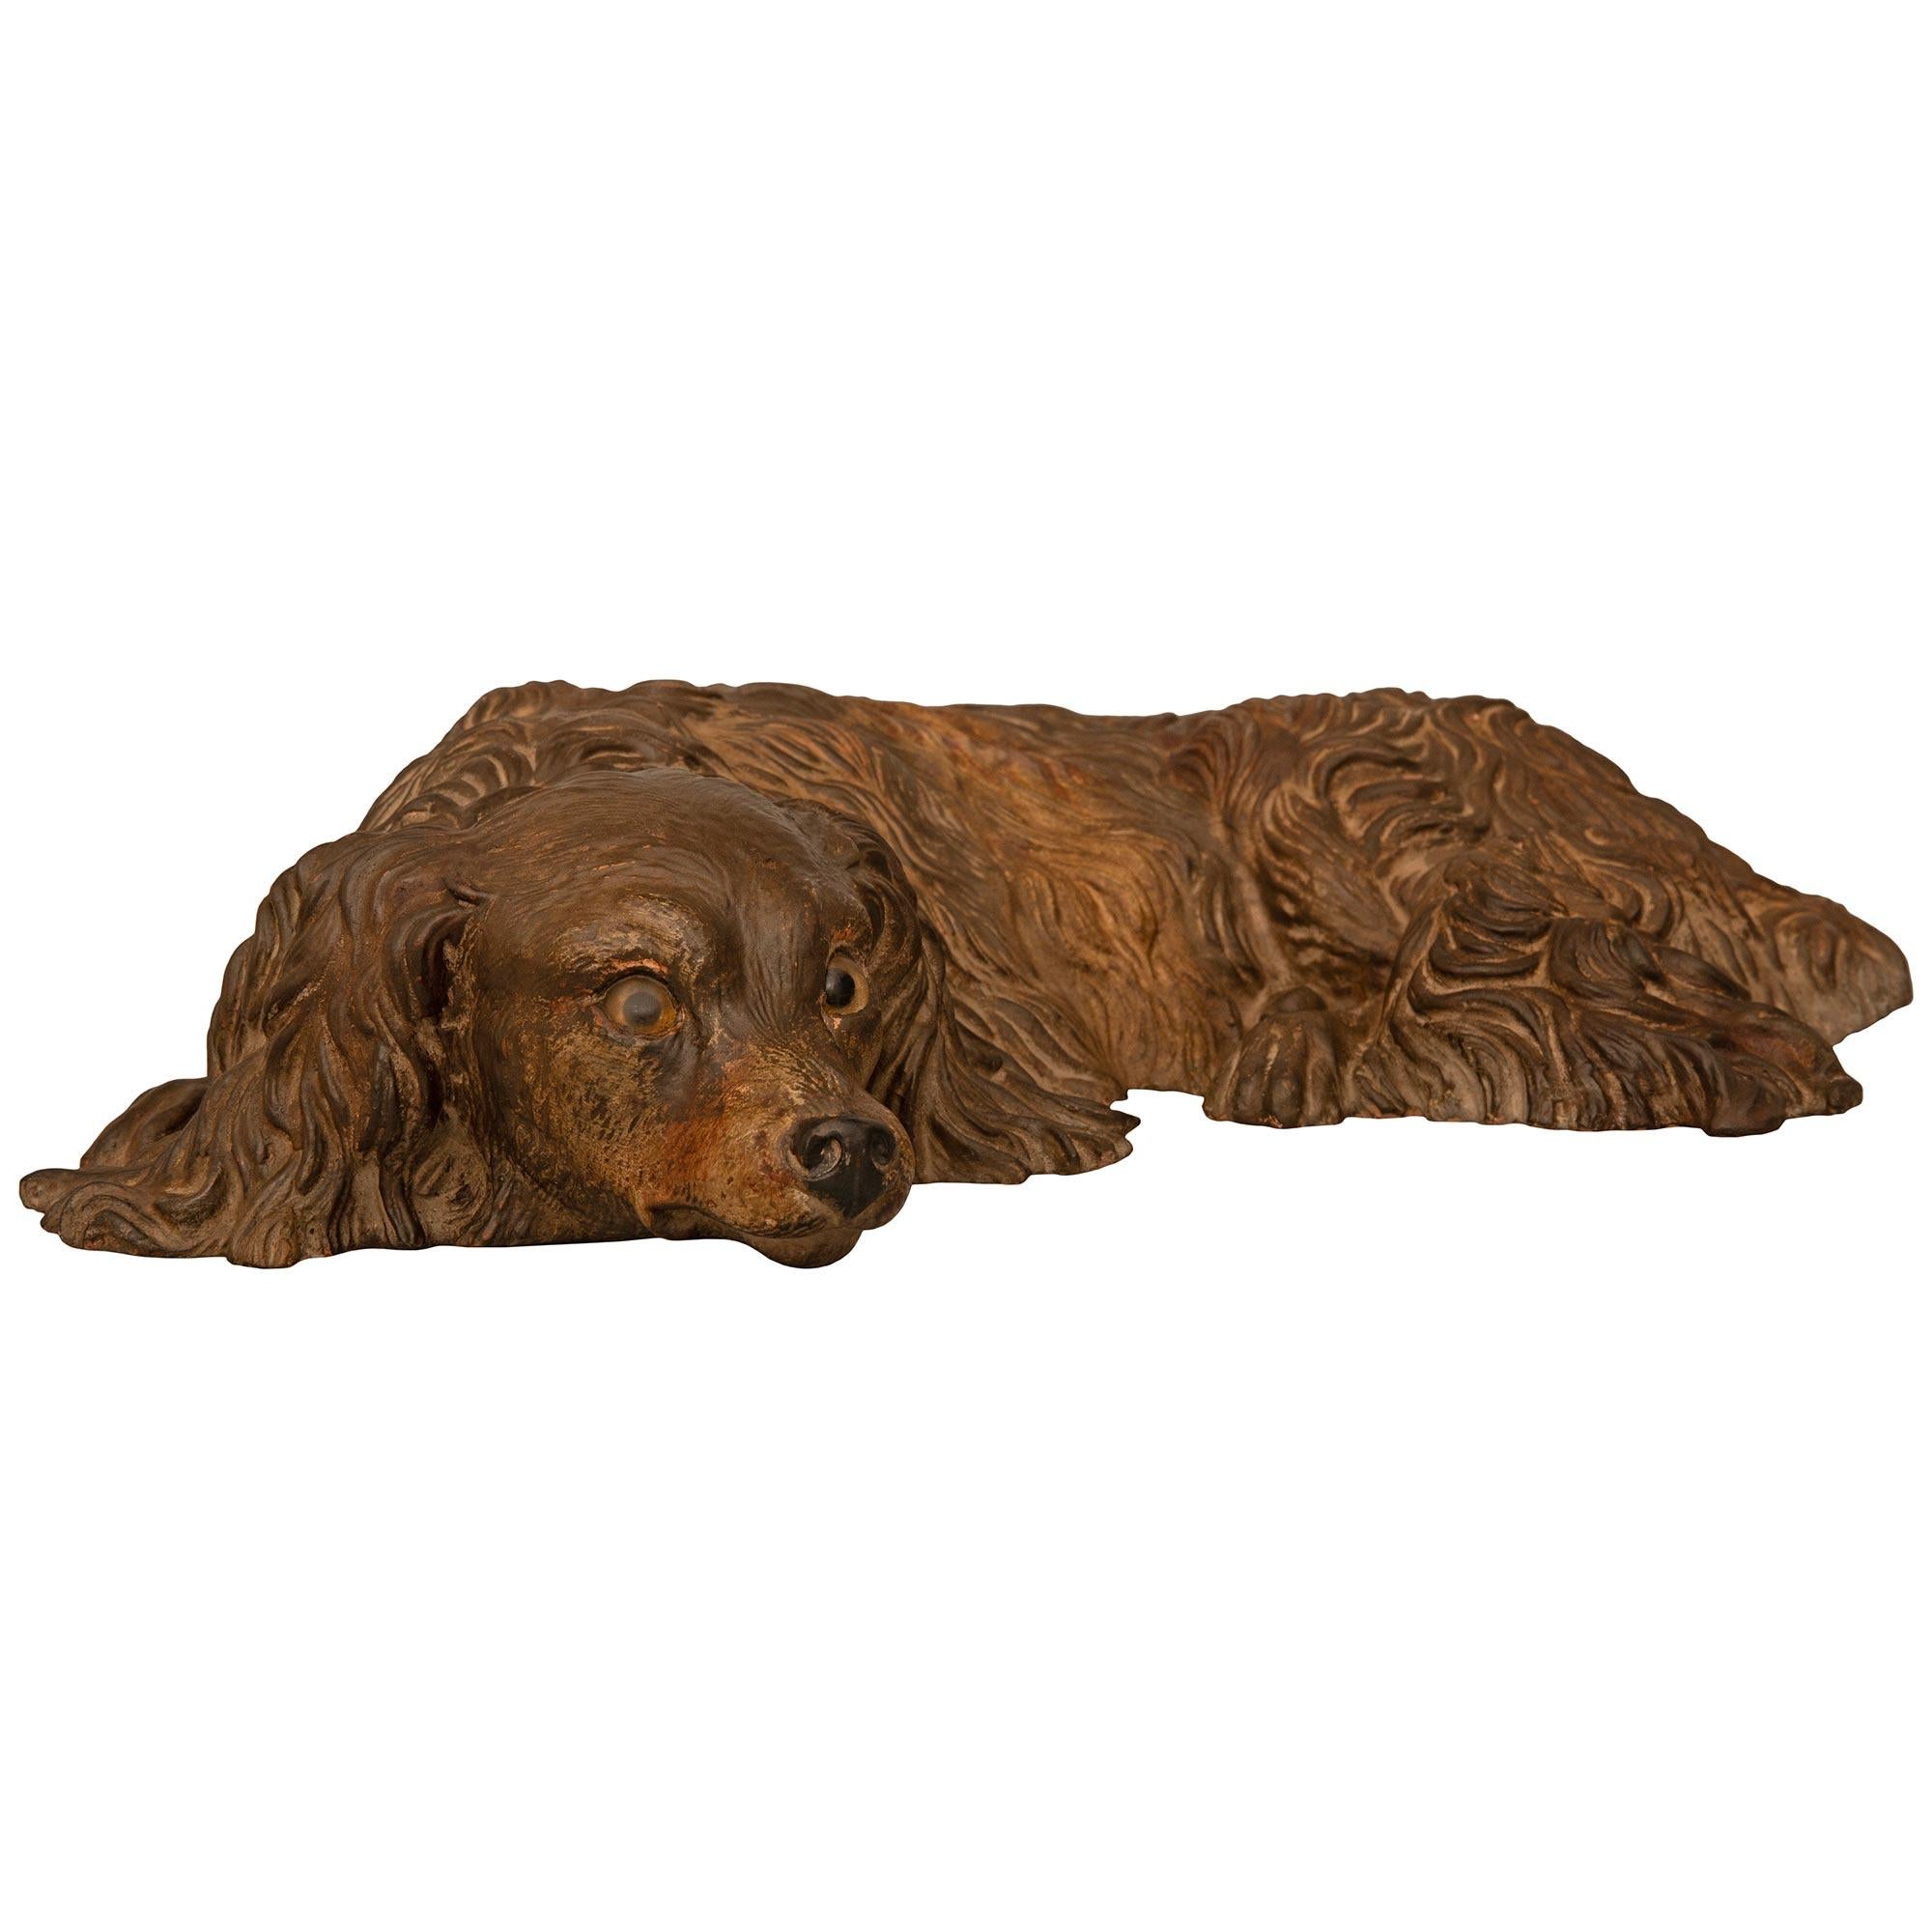 English 19th Century Terra Cotta Earthenware Statue Of A Dog In Good Condition For Sale In West Palm Beach, FL